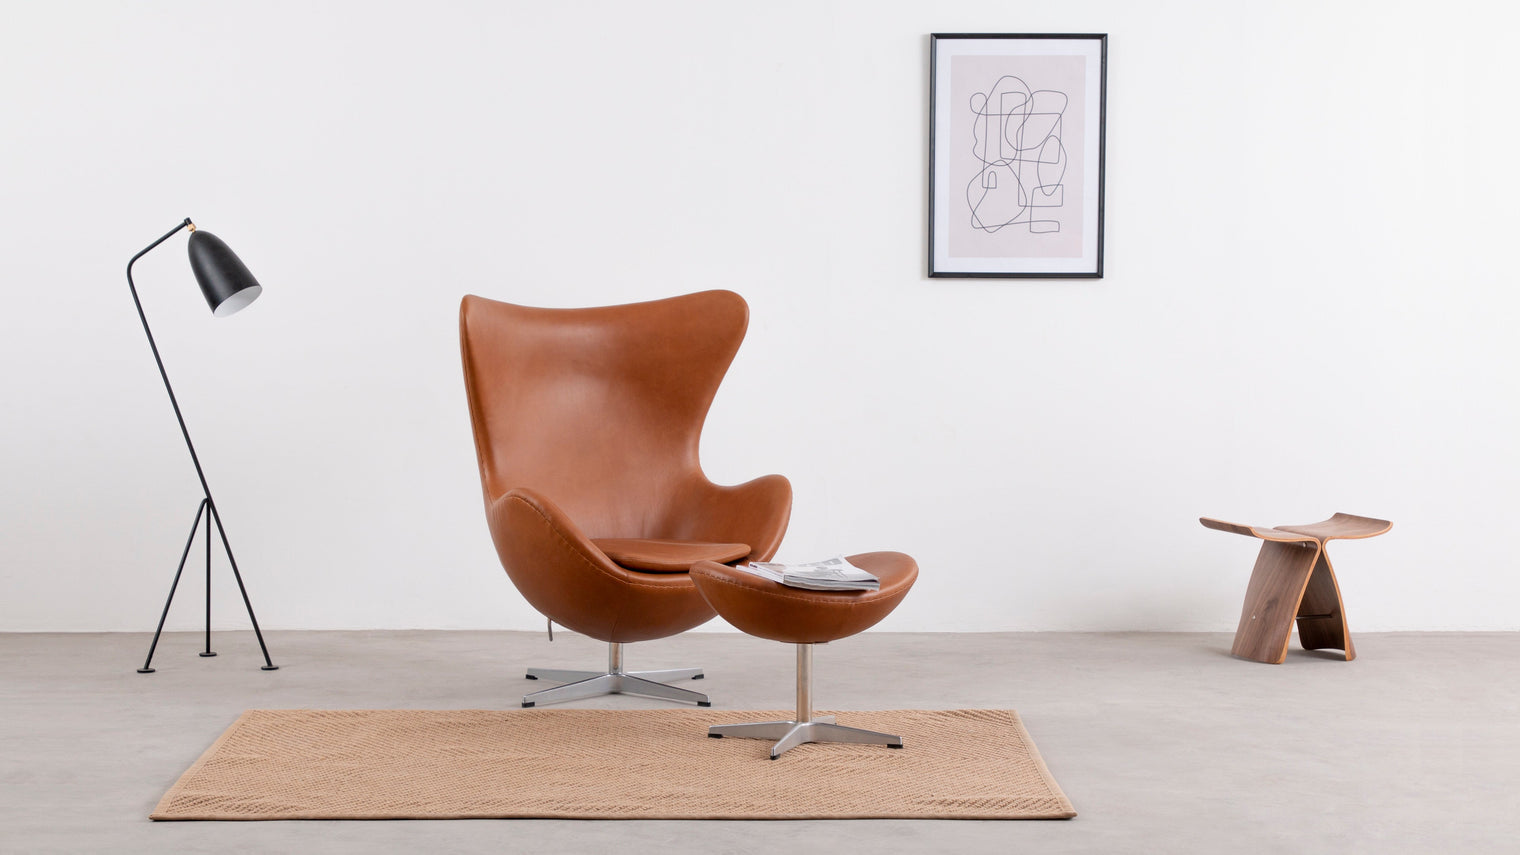 Excellent versatility|Designed to complement the famous Arne Chair, the Arne Stool adds comfort and style to the stunningly sophisticated chair. Not to be overshadowed by its predecessor, the stool is quite lovely and versatile on its own. It can be utilized as a traditional footstool or ottoman, and it’s also ideal for extra seating.
